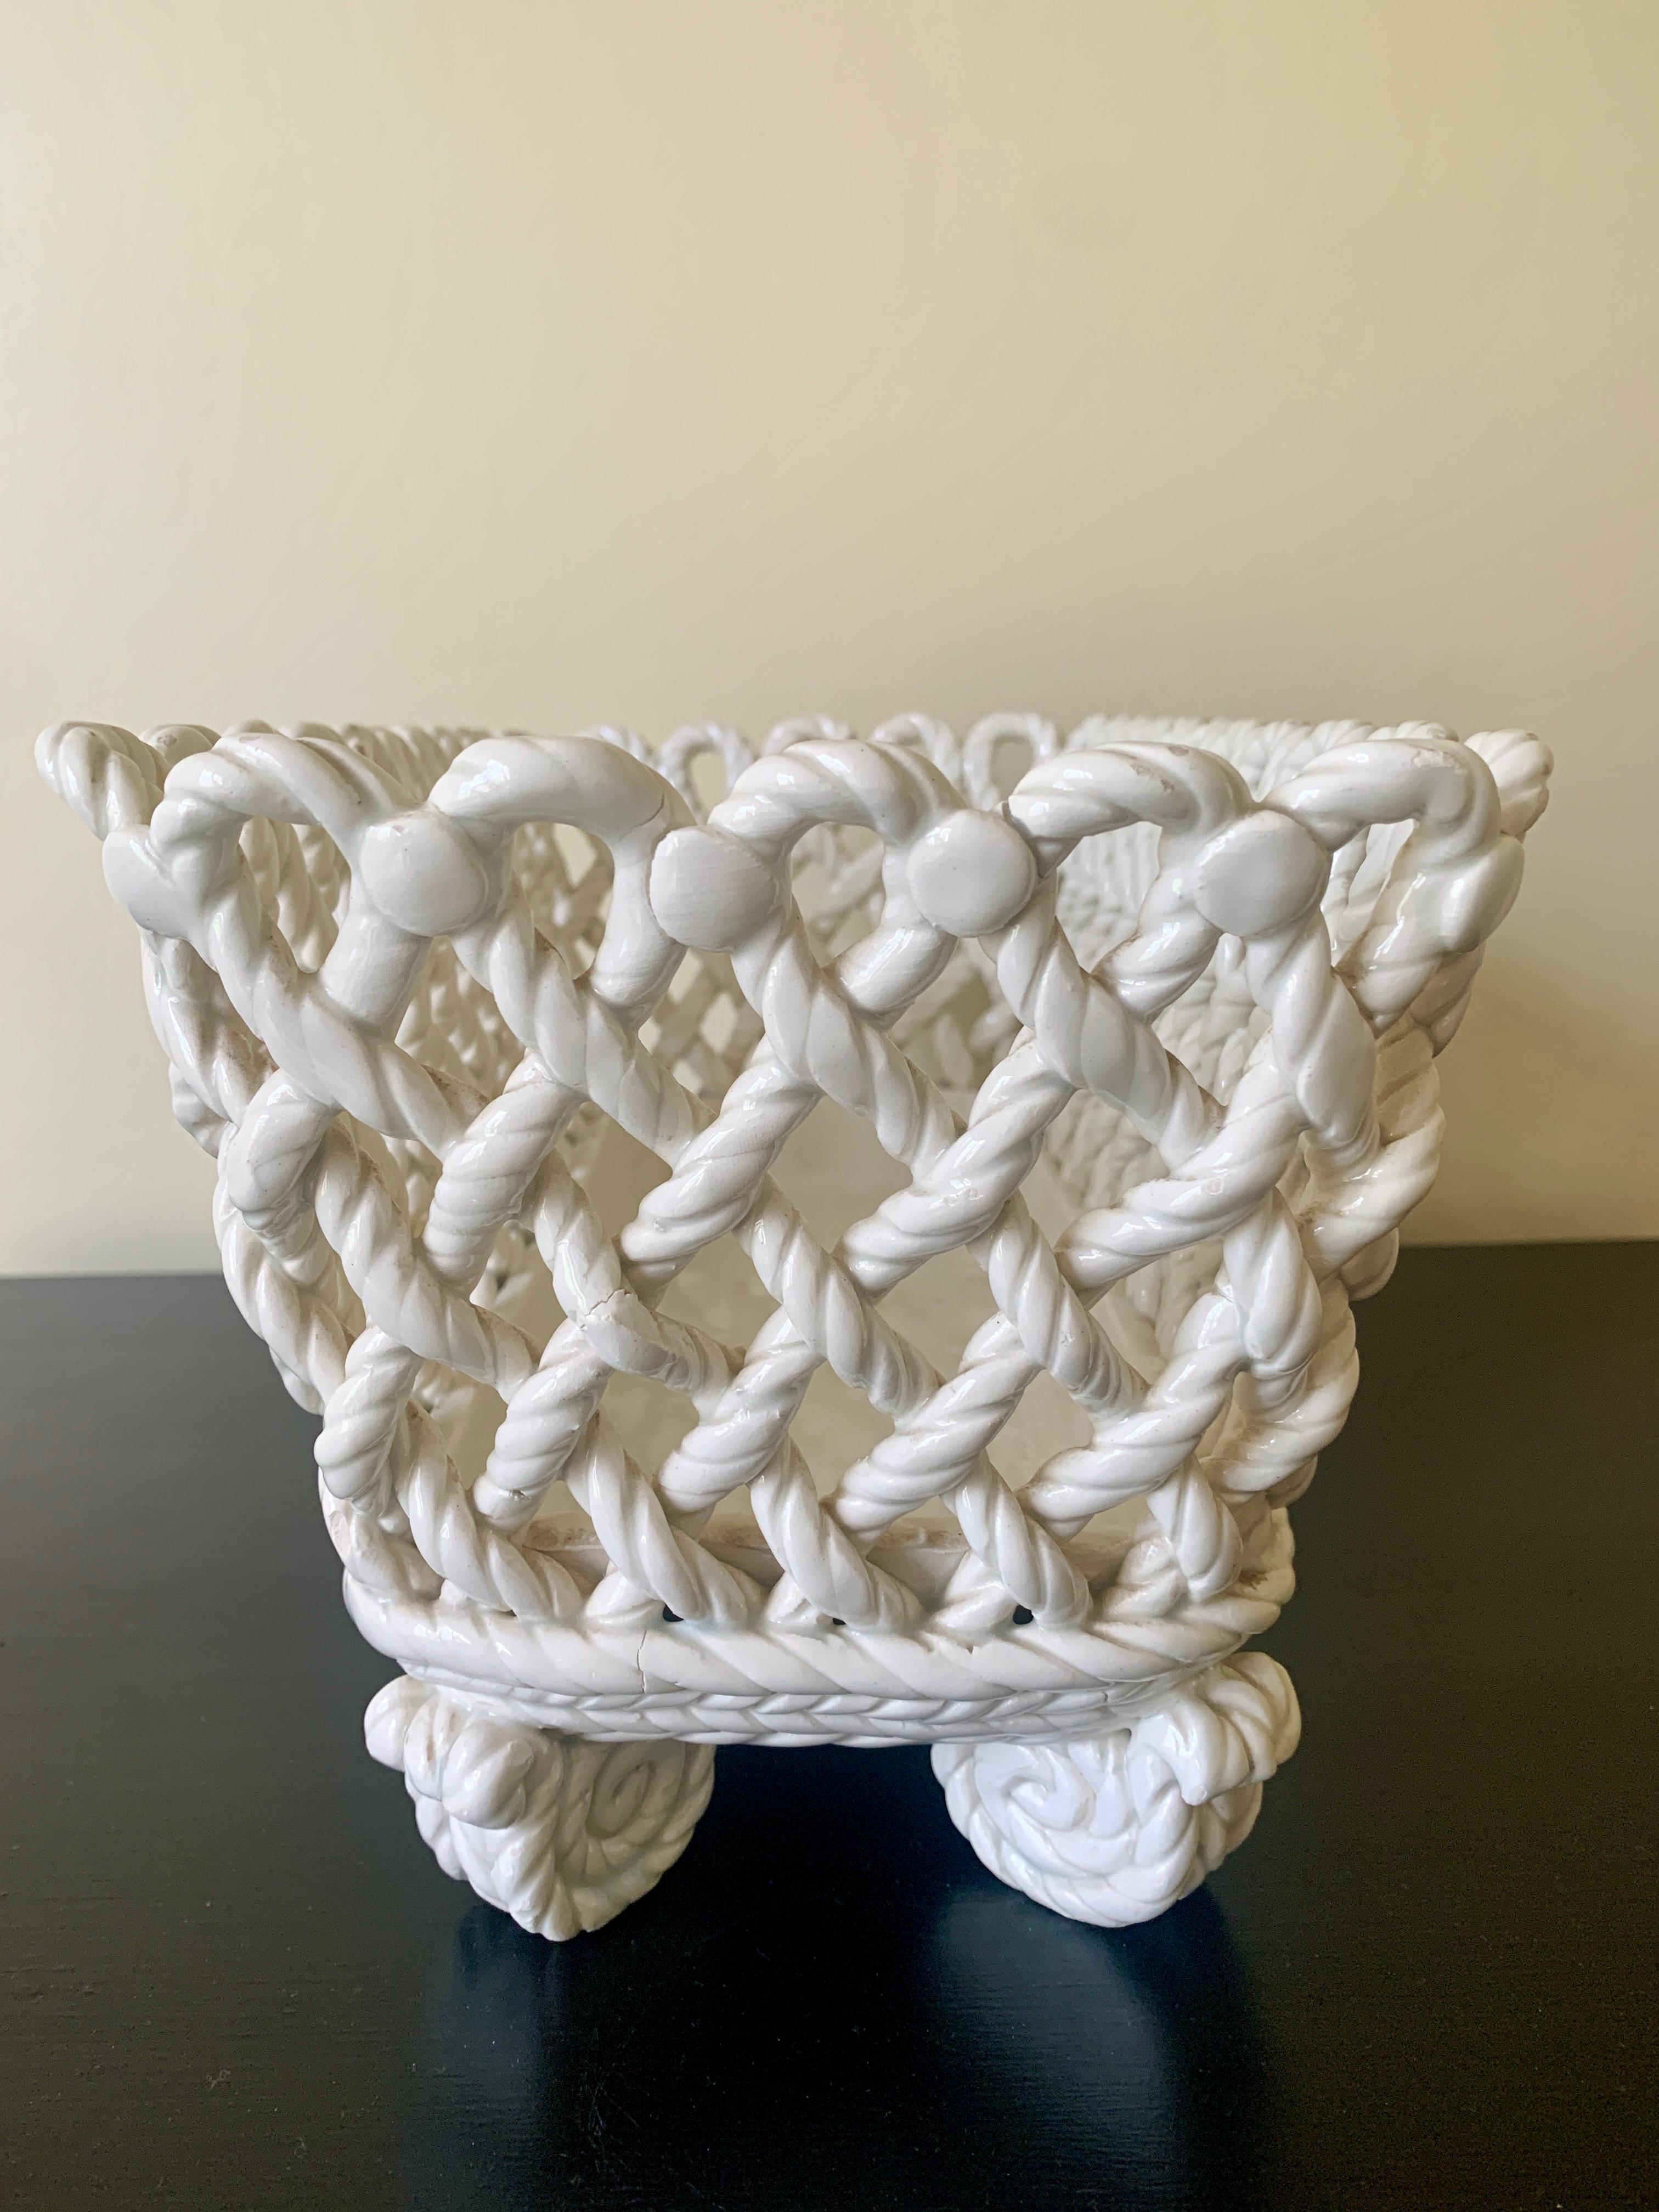 French Country White Ceramic Woven Rope Cachepot Basket For Sale 3